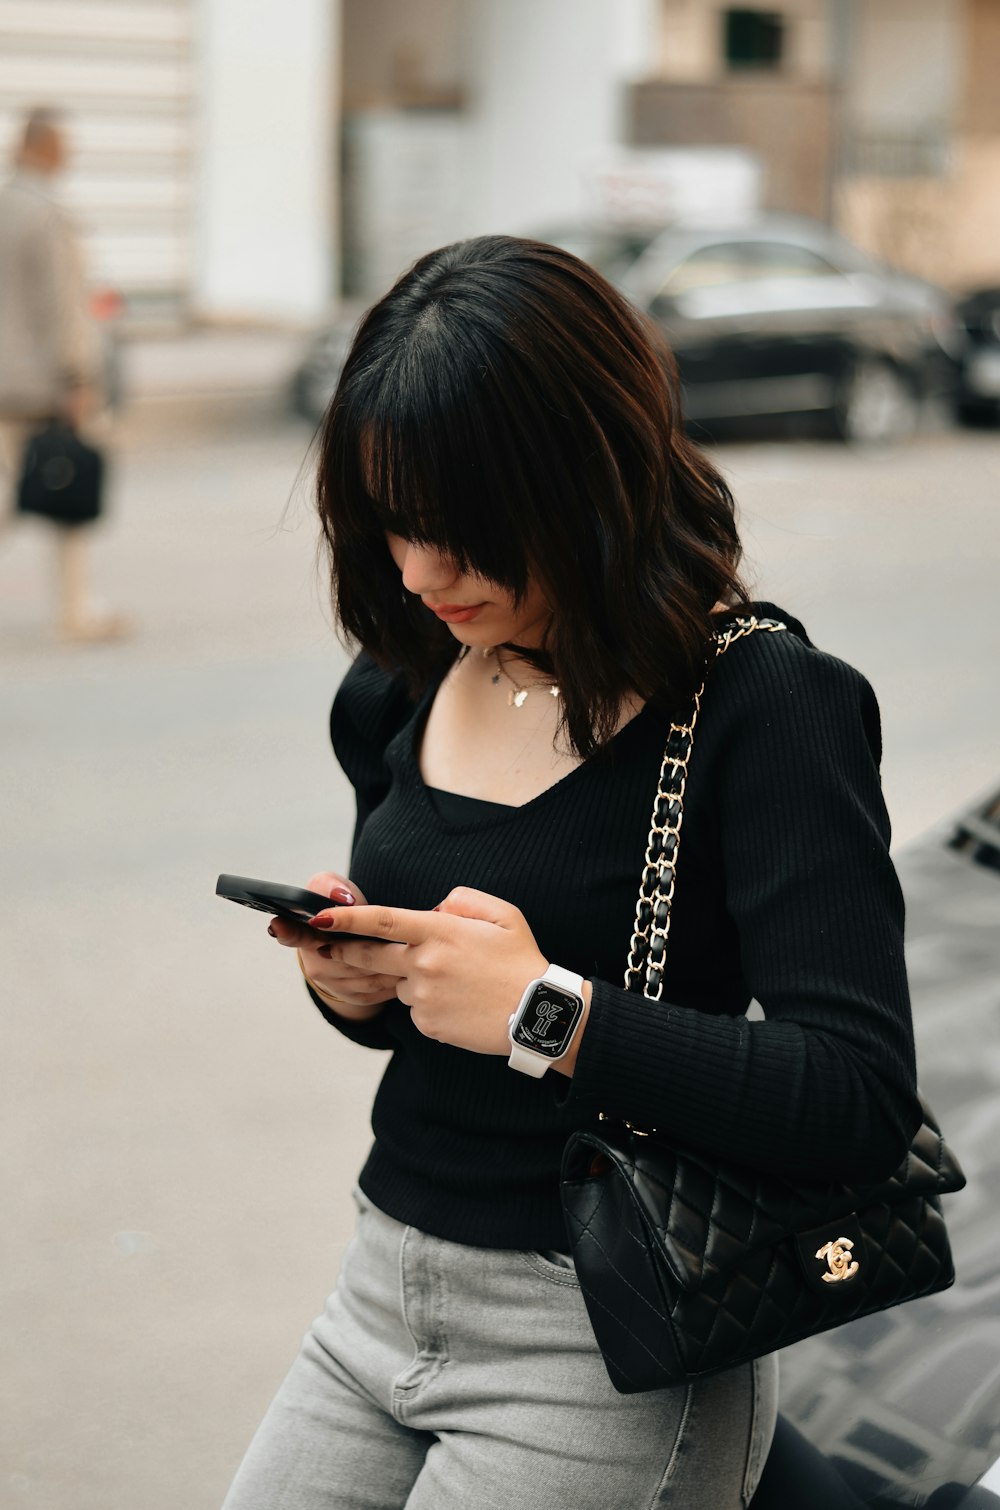 a woman in a black top is looking at her cell phone